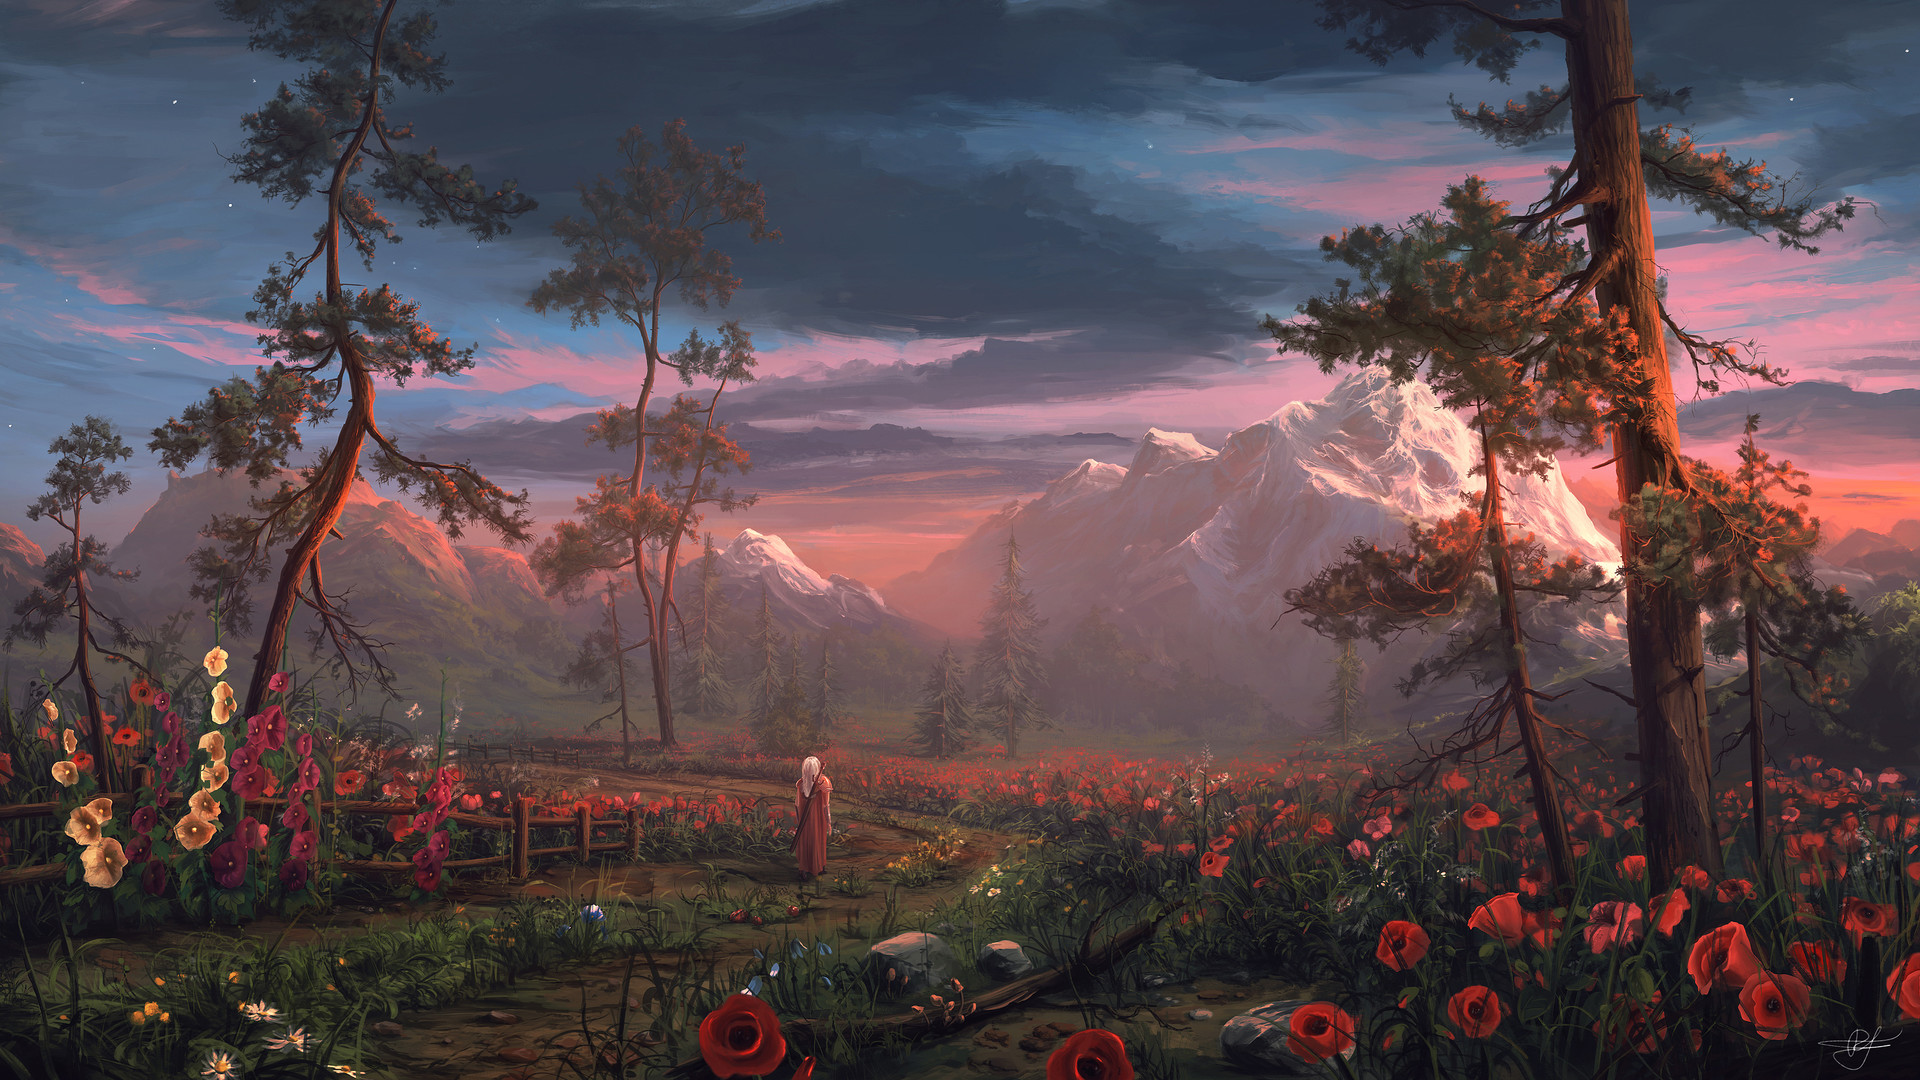 General 1920x1080 Max Suleimanov digital art landscape poppies mountains trees clouds The Witcher 3: Wild Hunt